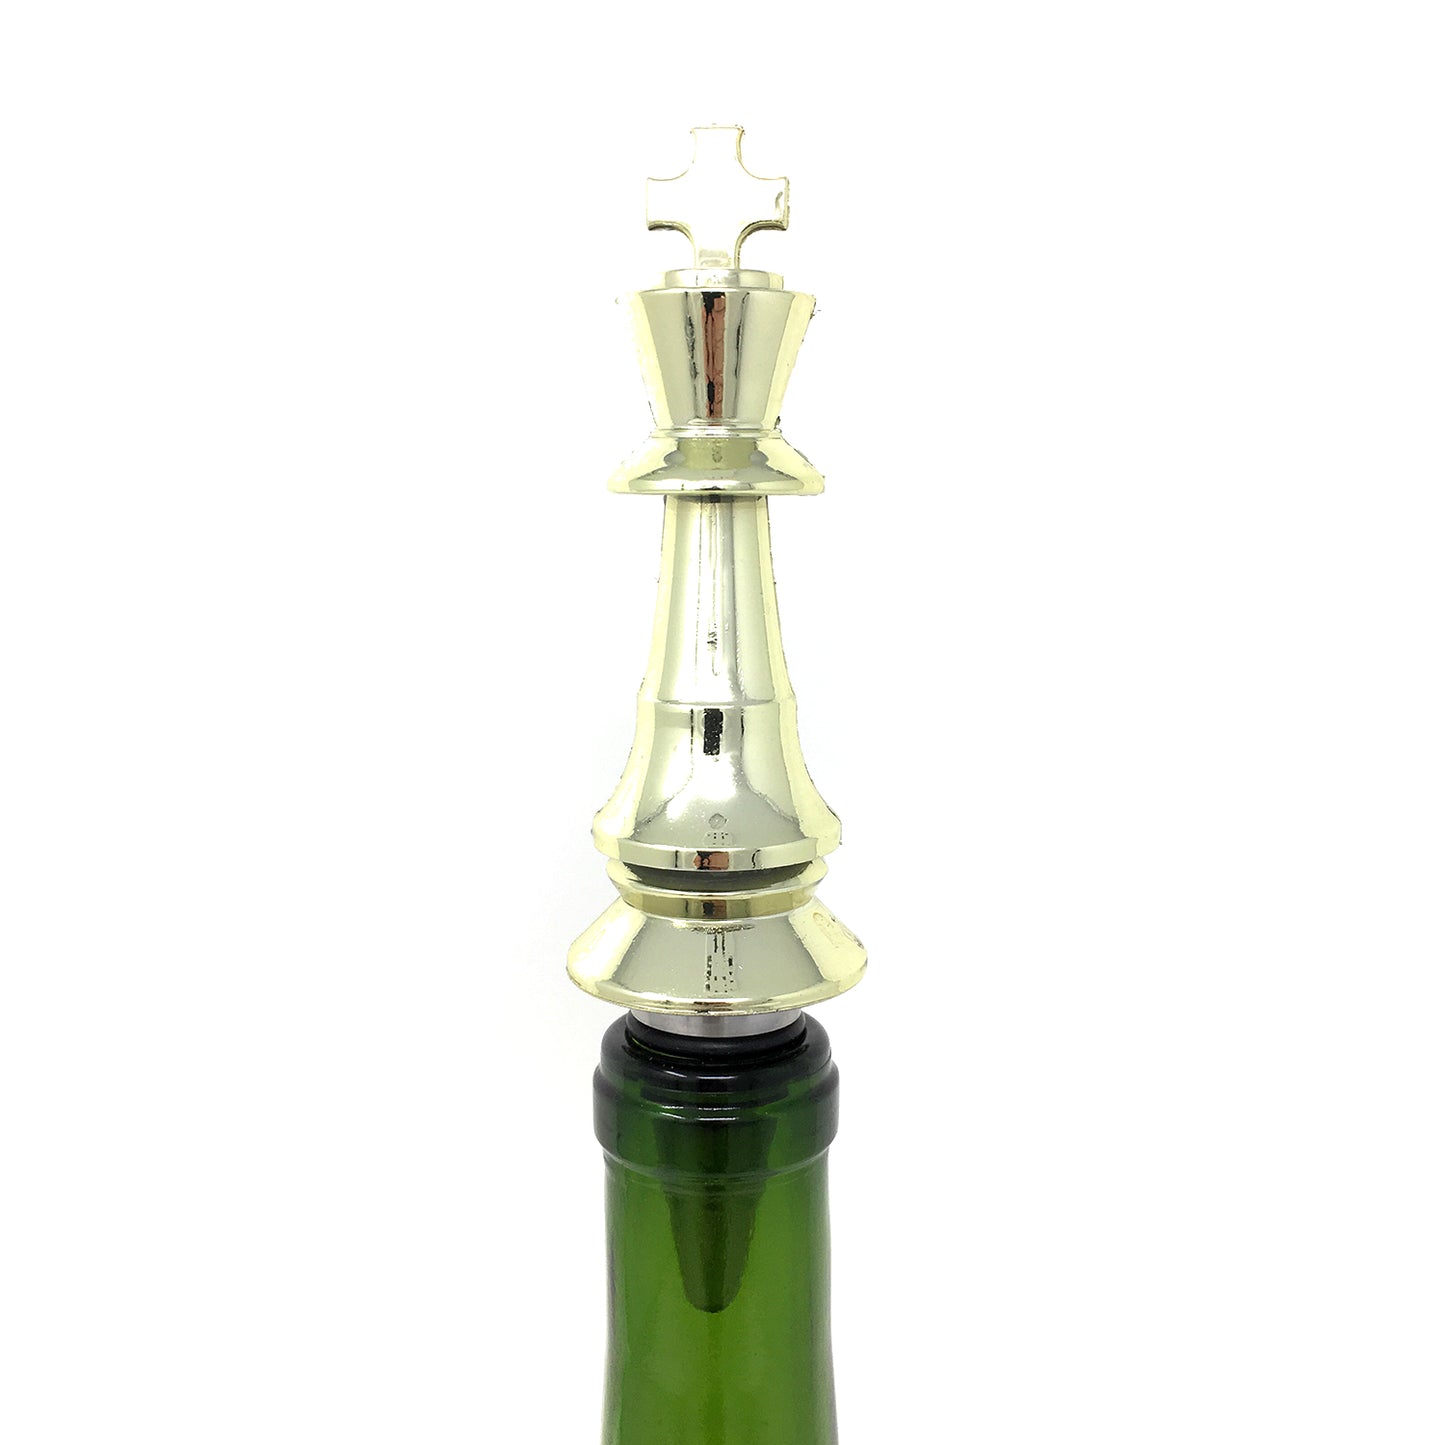 Chess Trophy Wine Bottle Stopper with Stainless Steel Base